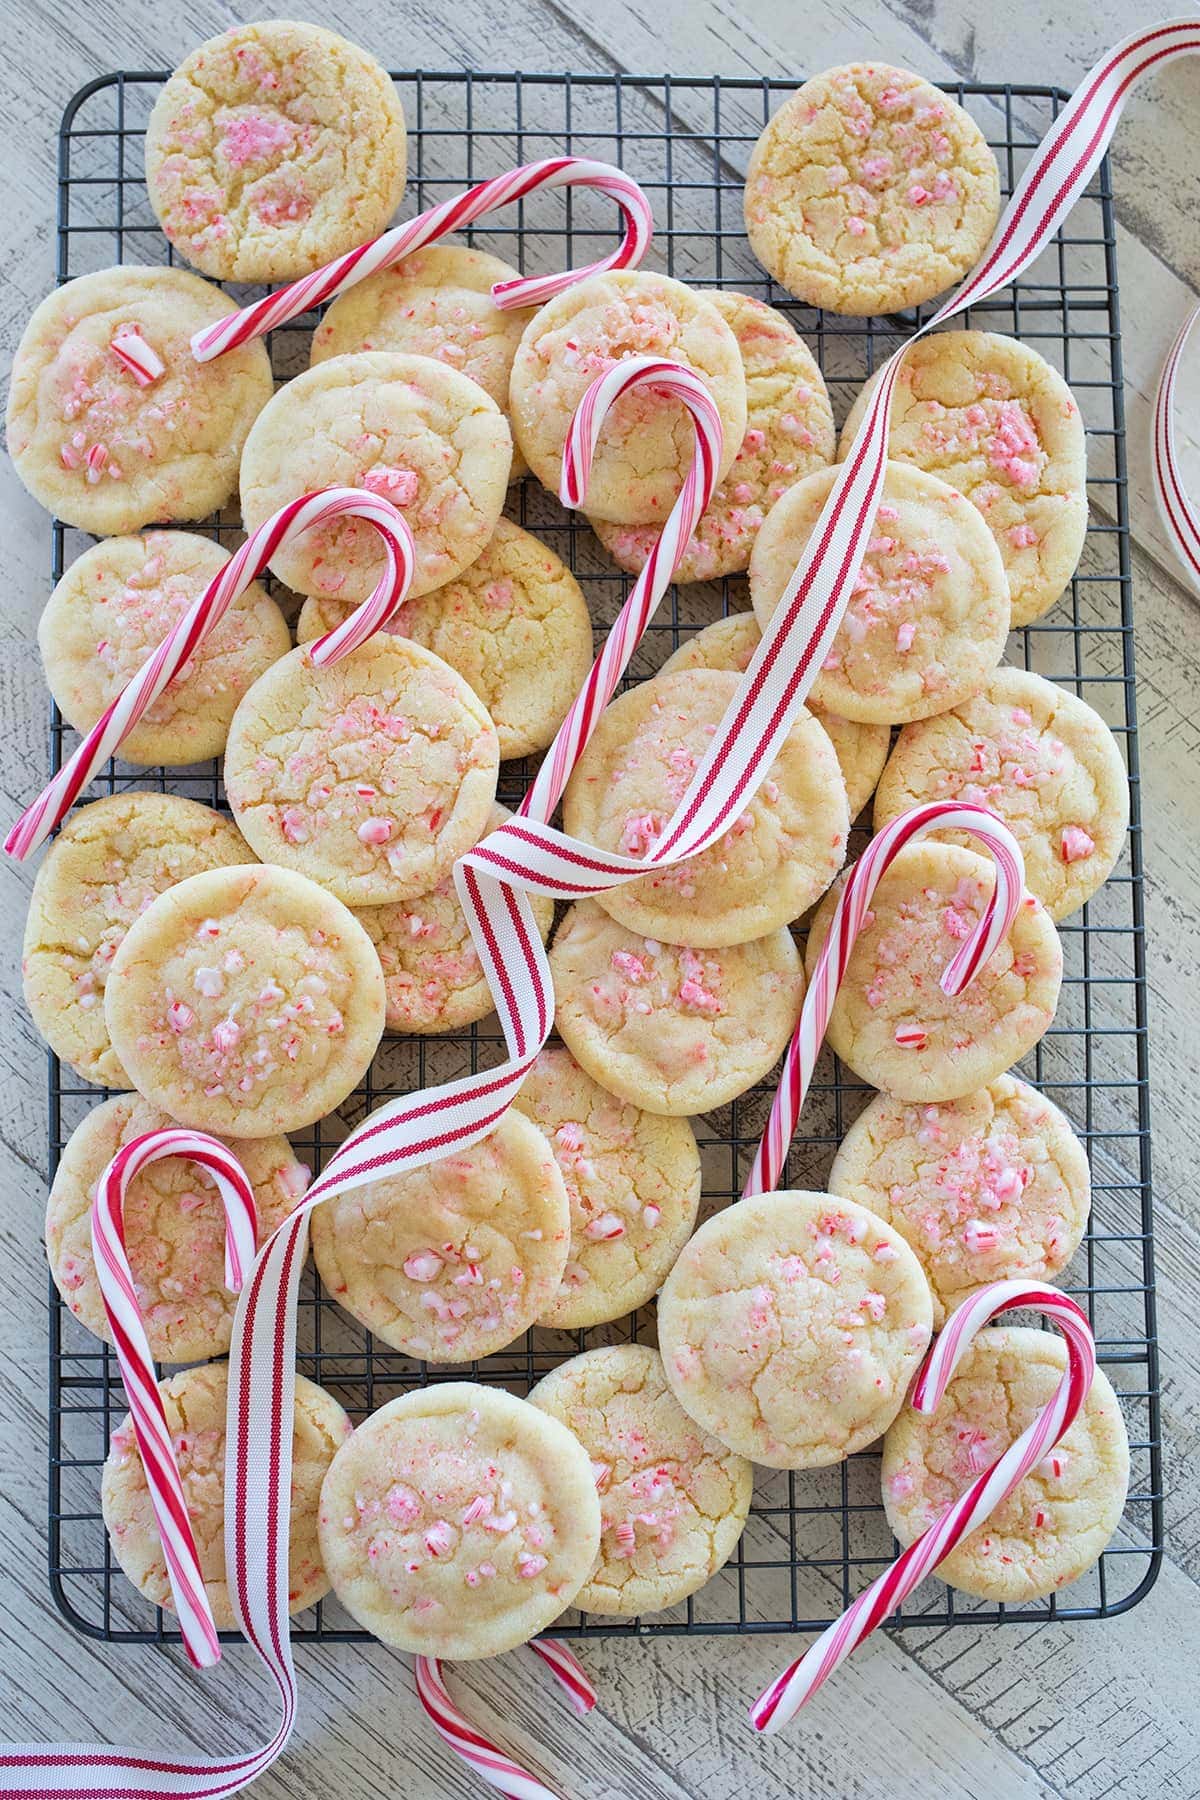 White Chocolate Chip Peppermint Sugar Cookies